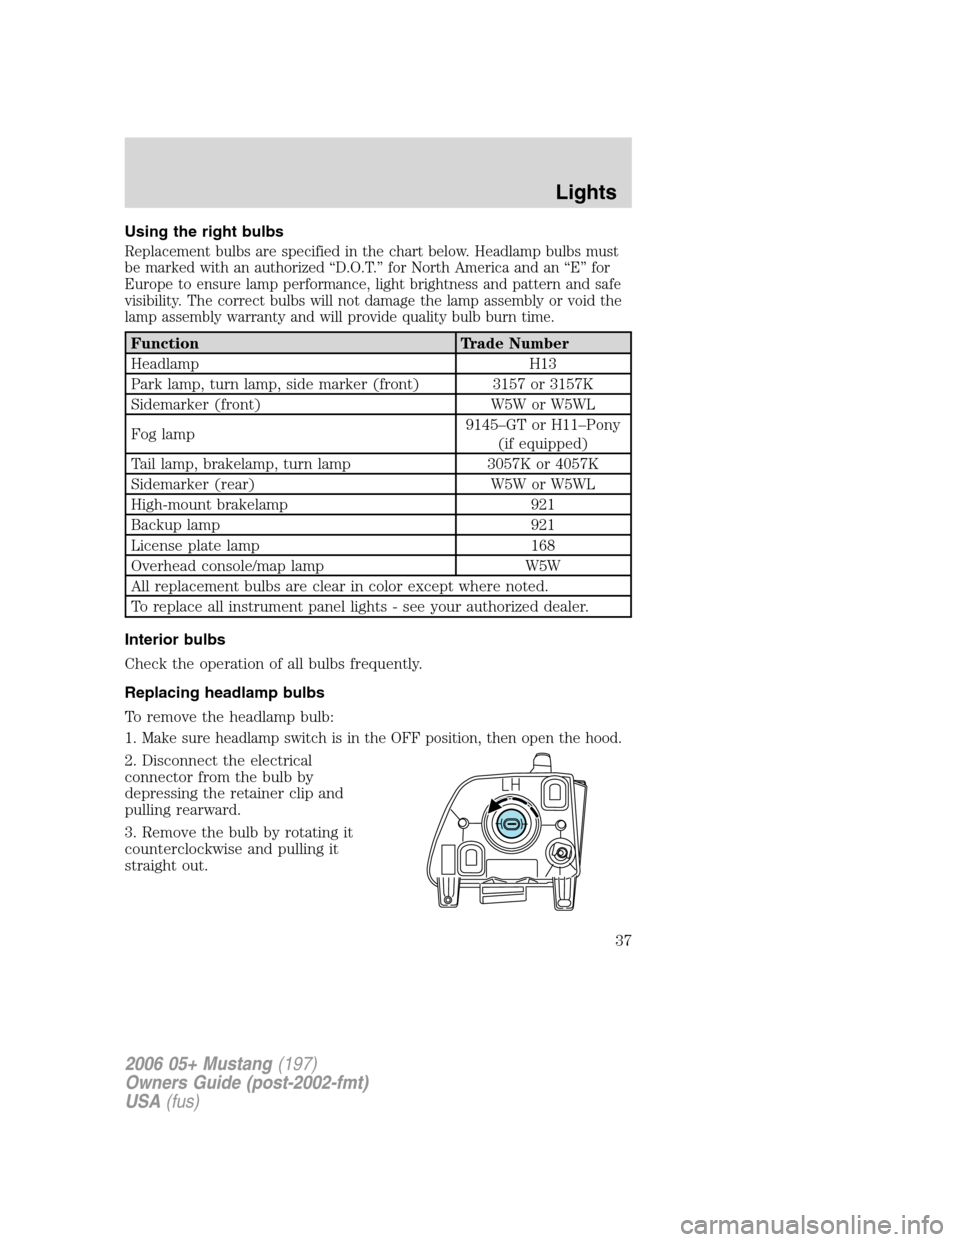 FORD MUSTANG 2006 5.G Owners Guide Using the right bulbs
Replacement bulbs are specified in the chart below. Headlamp bulbs must
be marked with an authorized “D.O.T.” for North America and an “E” for
Europe to ensure lamp perfo